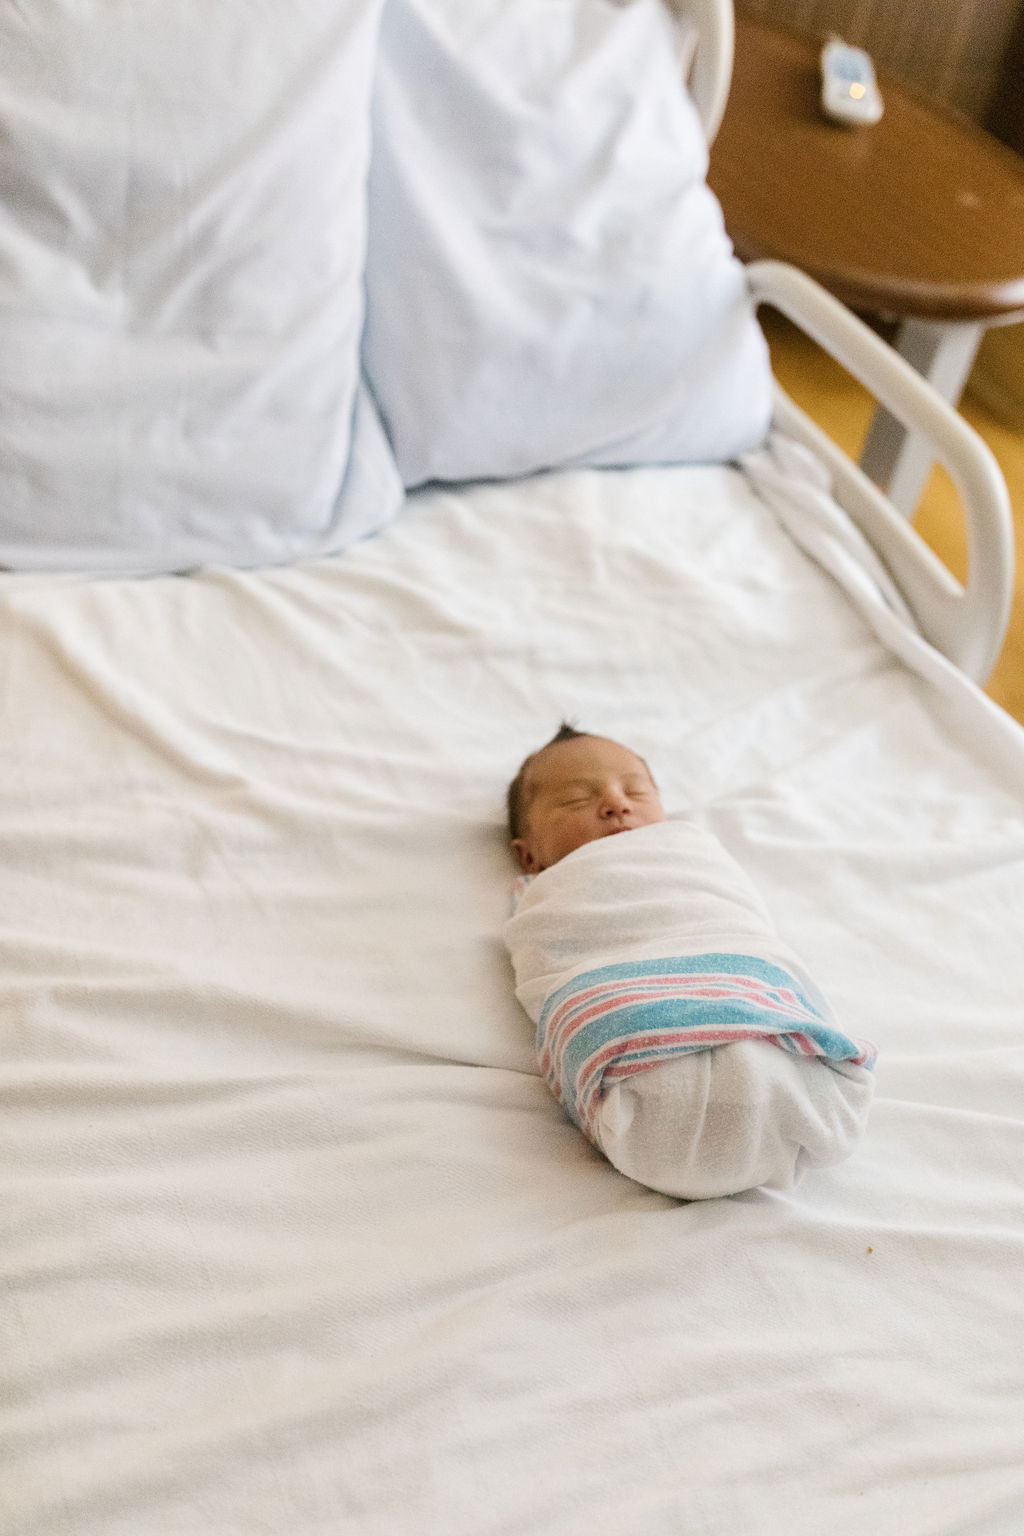 newborn wrapped in a blue and pink striped hospital blanket 